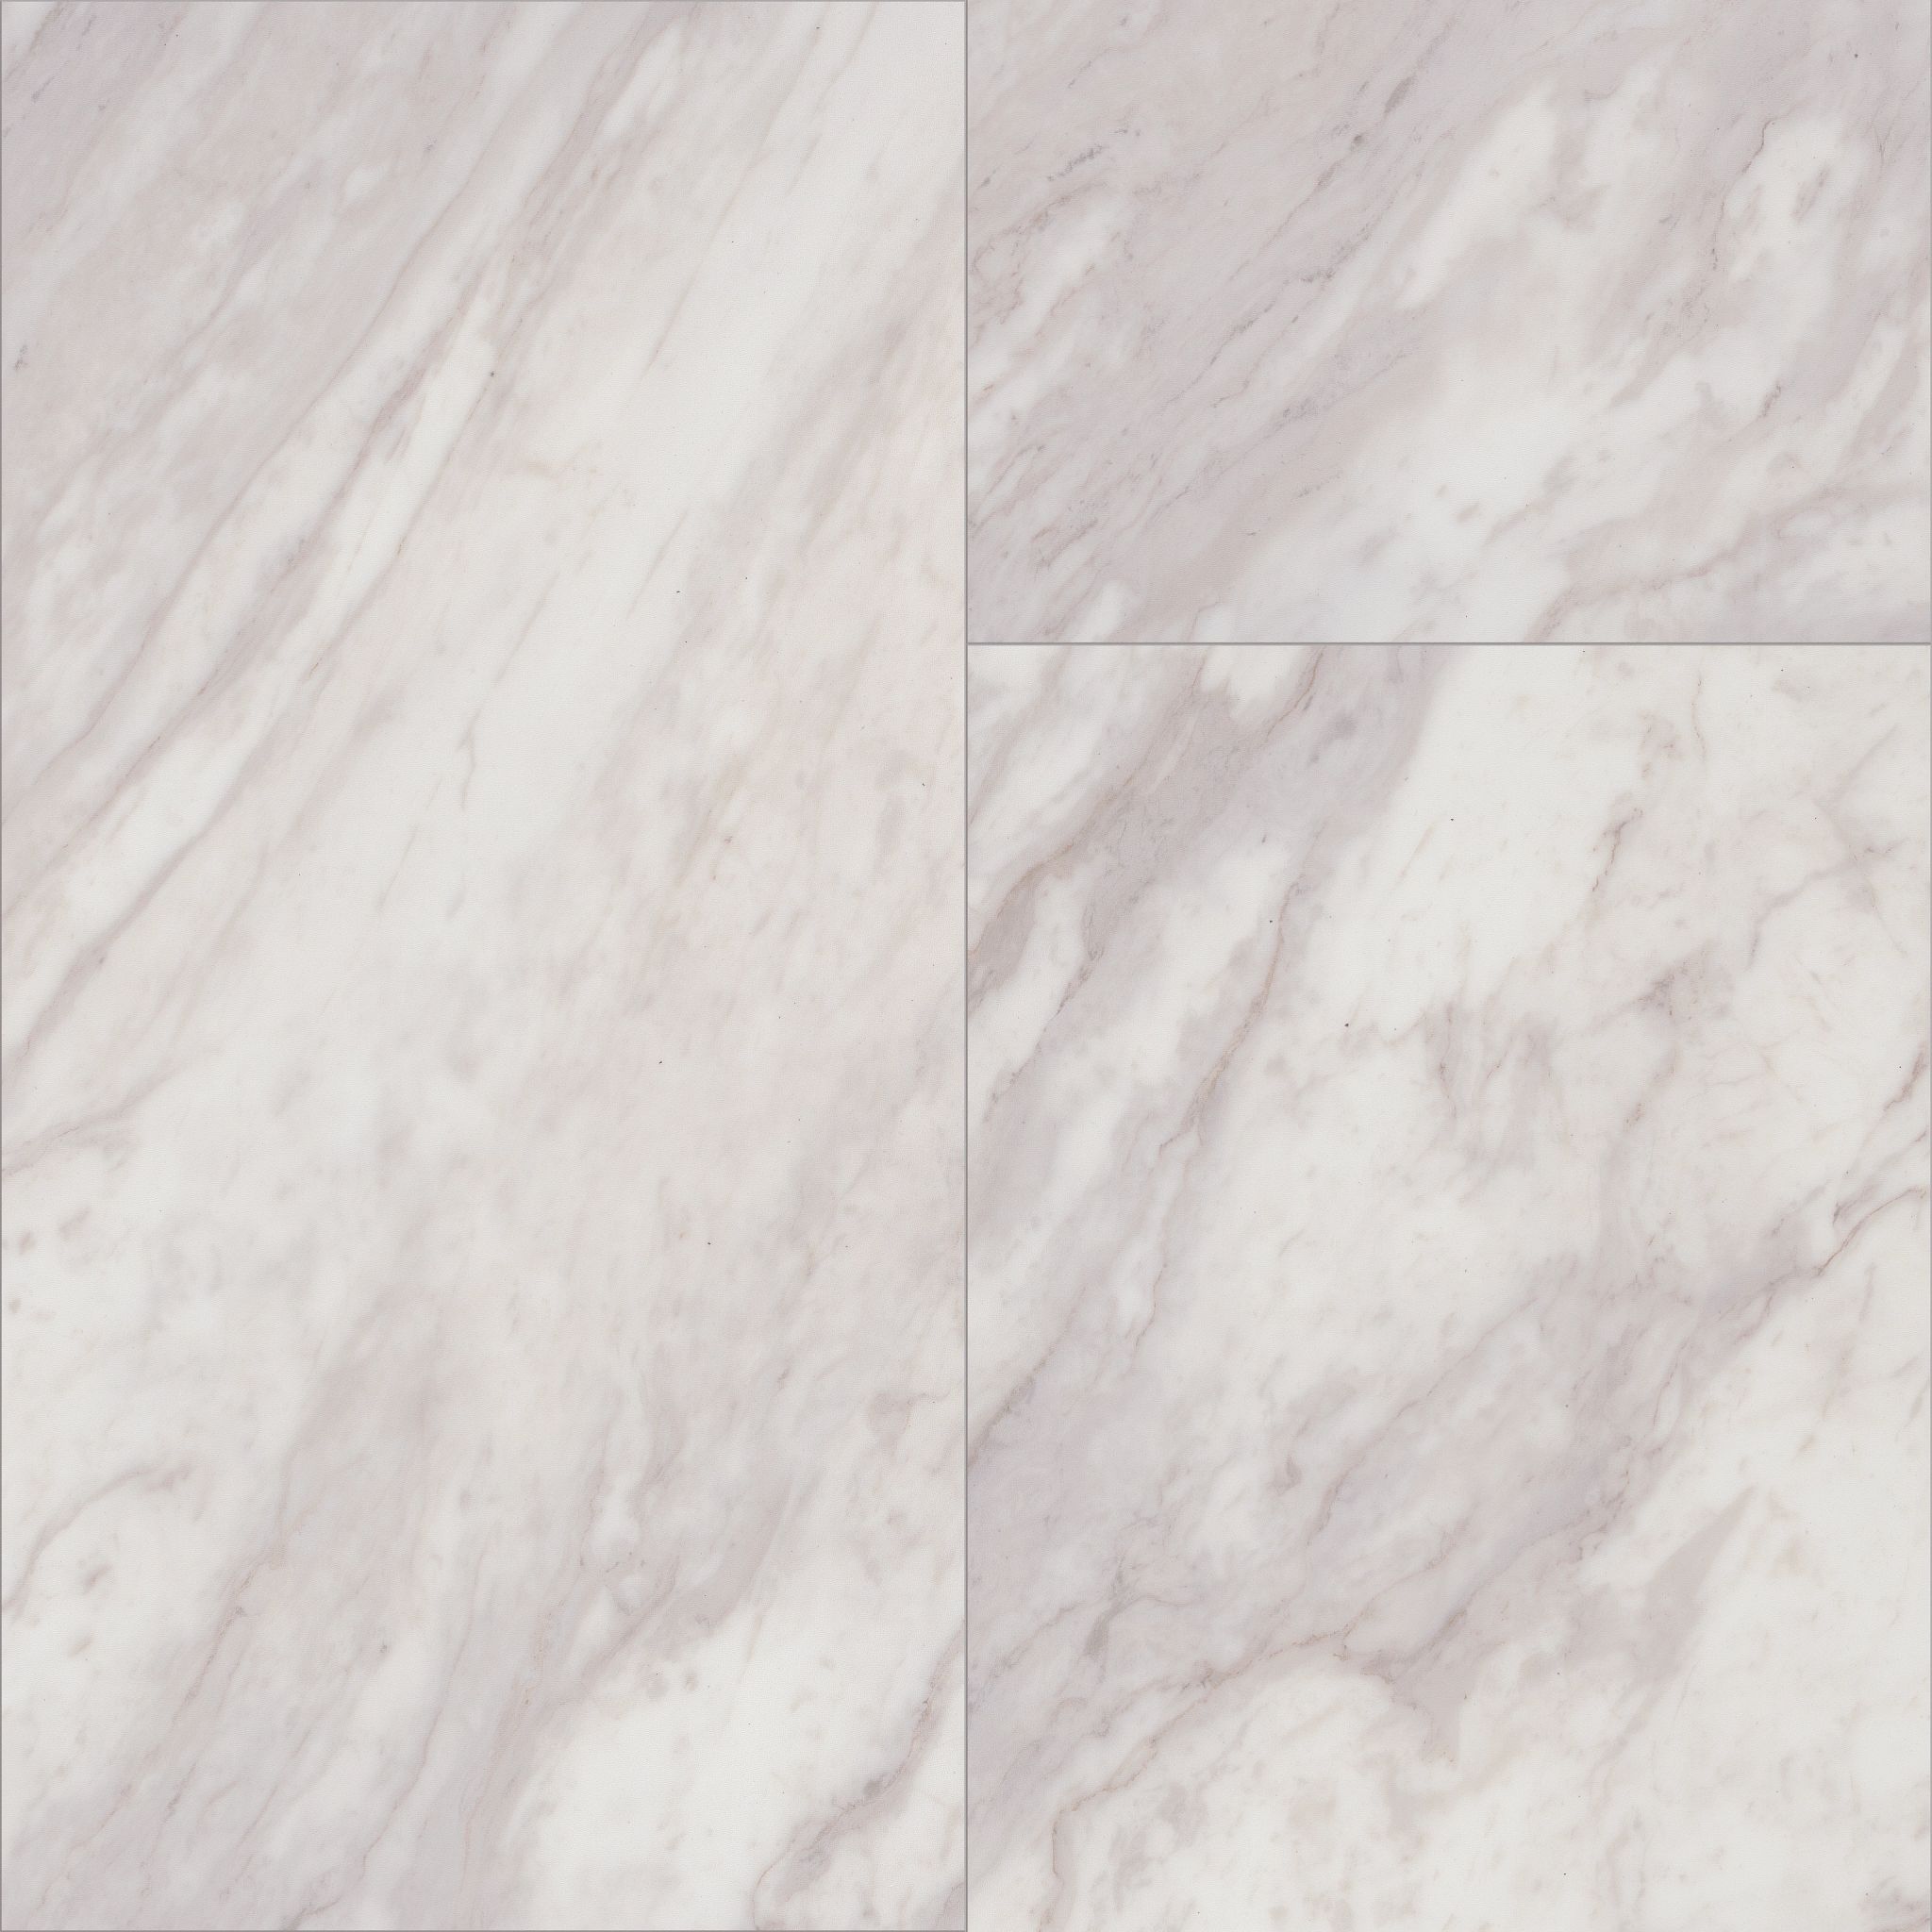 Style name and number: Paragon Tile Plus 1022V and color name and number: Oyster 01010